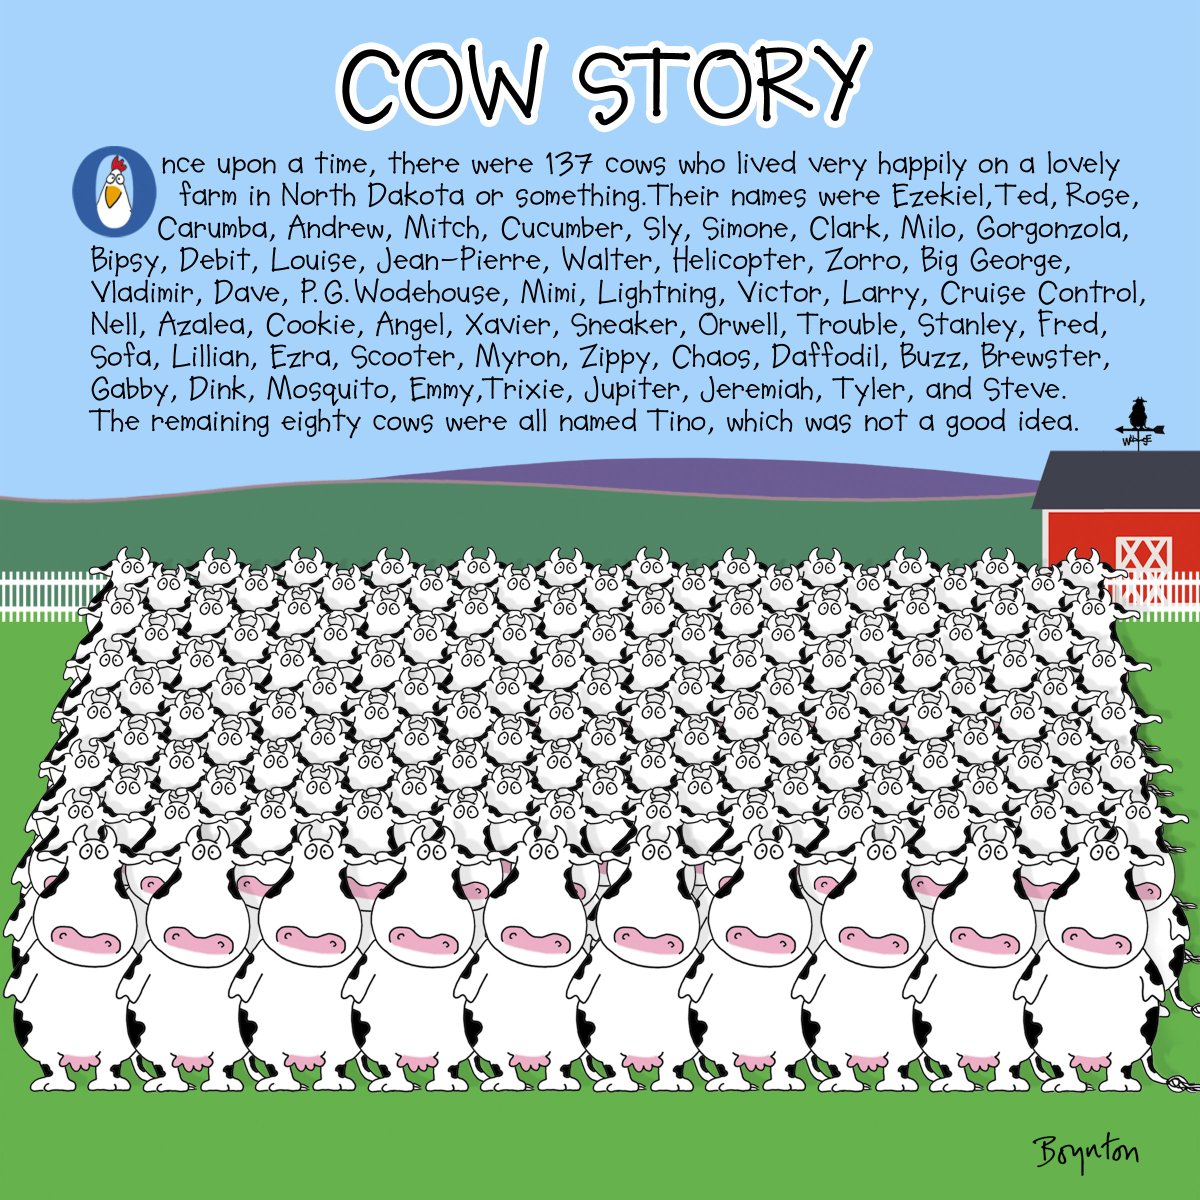 April 10 is Farm Animals Day. So here's the tantalizing start of a dramatic rural story I wrote, titled 'Red Rover.' #NationalFarmAnimalsDay #FarmAnimalsDay #Moo